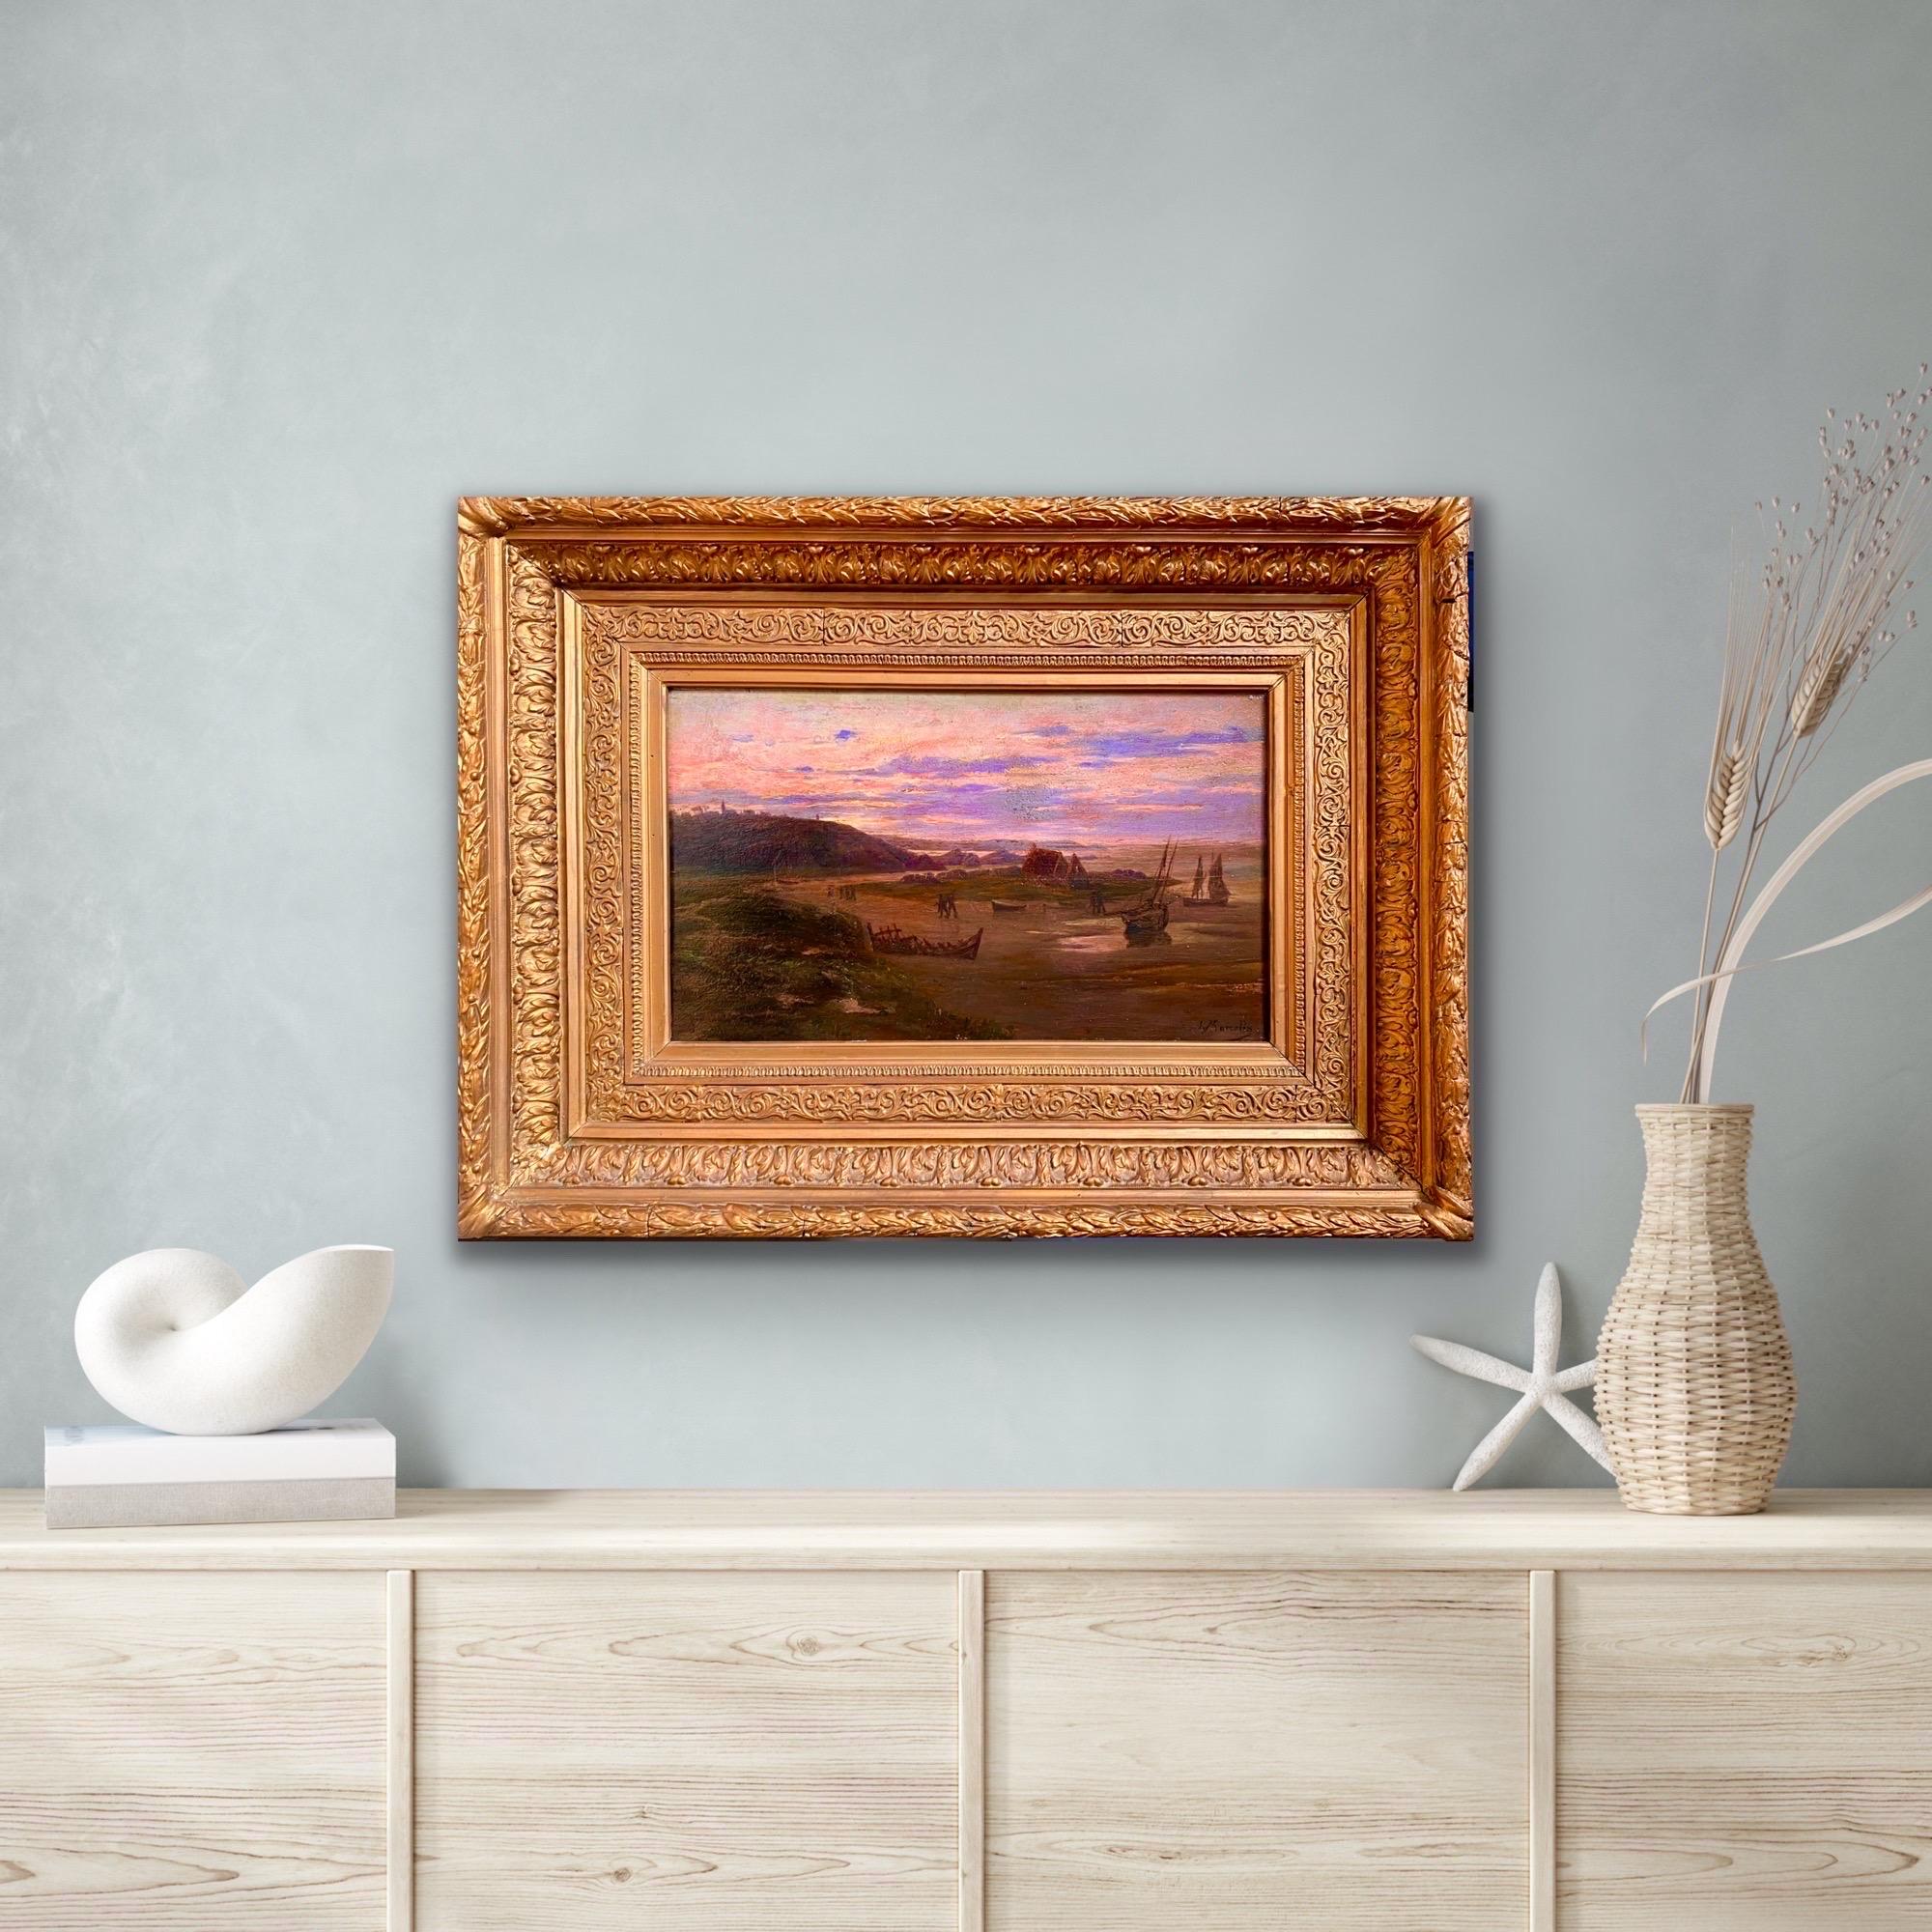 19th French painting Sunset over the beach by Jacques Marcelin

Wonderful and vibrant French impressionist painting depicting a sunset over a French beach. Fishermen can be seen returning home while the sunset beautifully colours the sky. In the